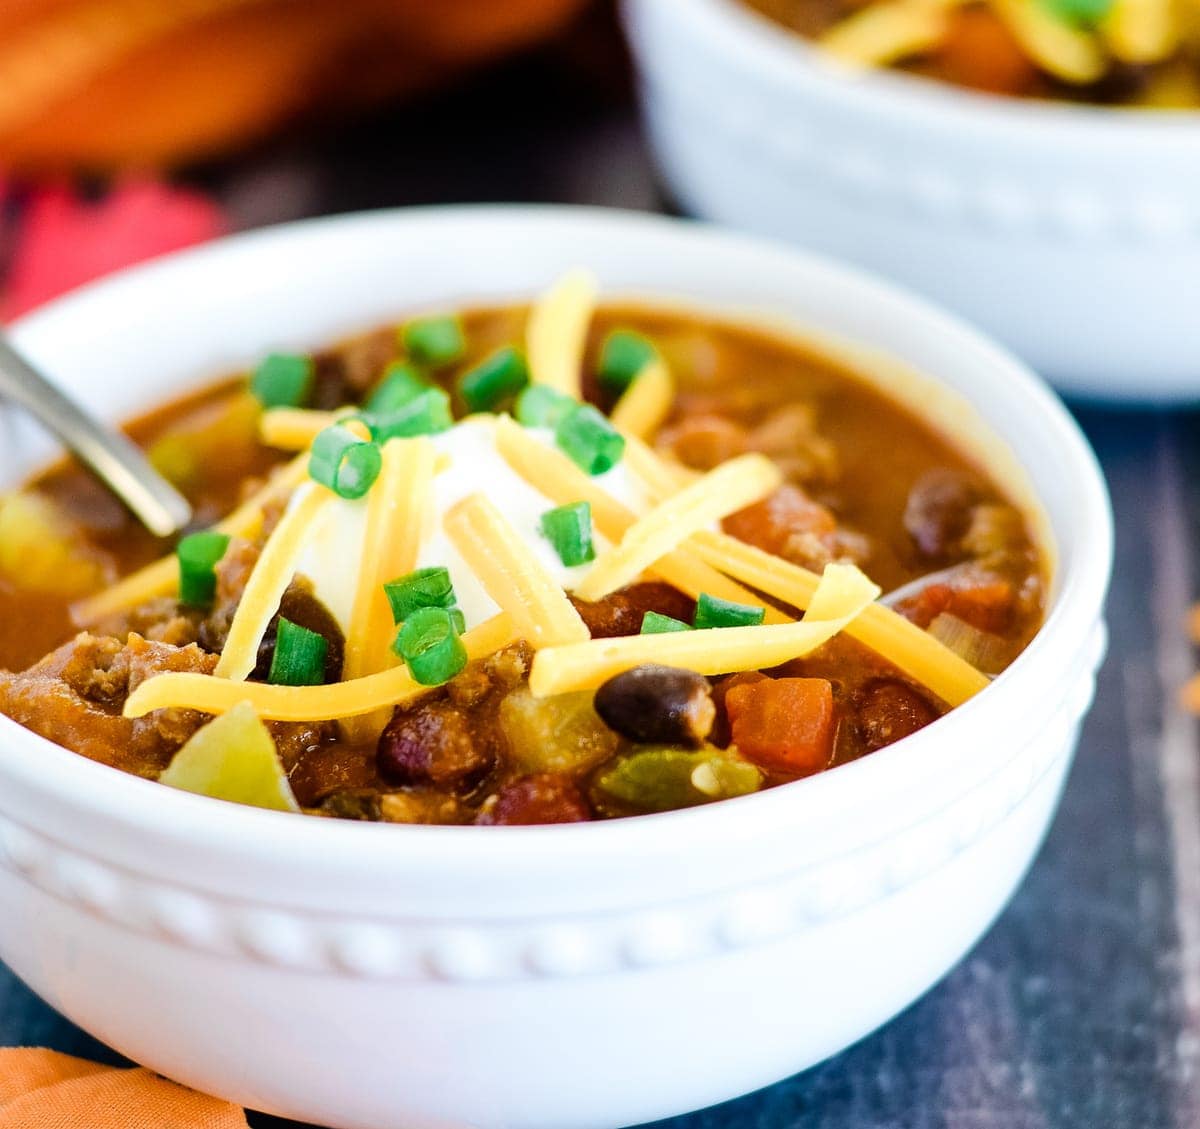 Pumpkin recipes - White bowl of pumpkin chili topped with cheese and sour cream.